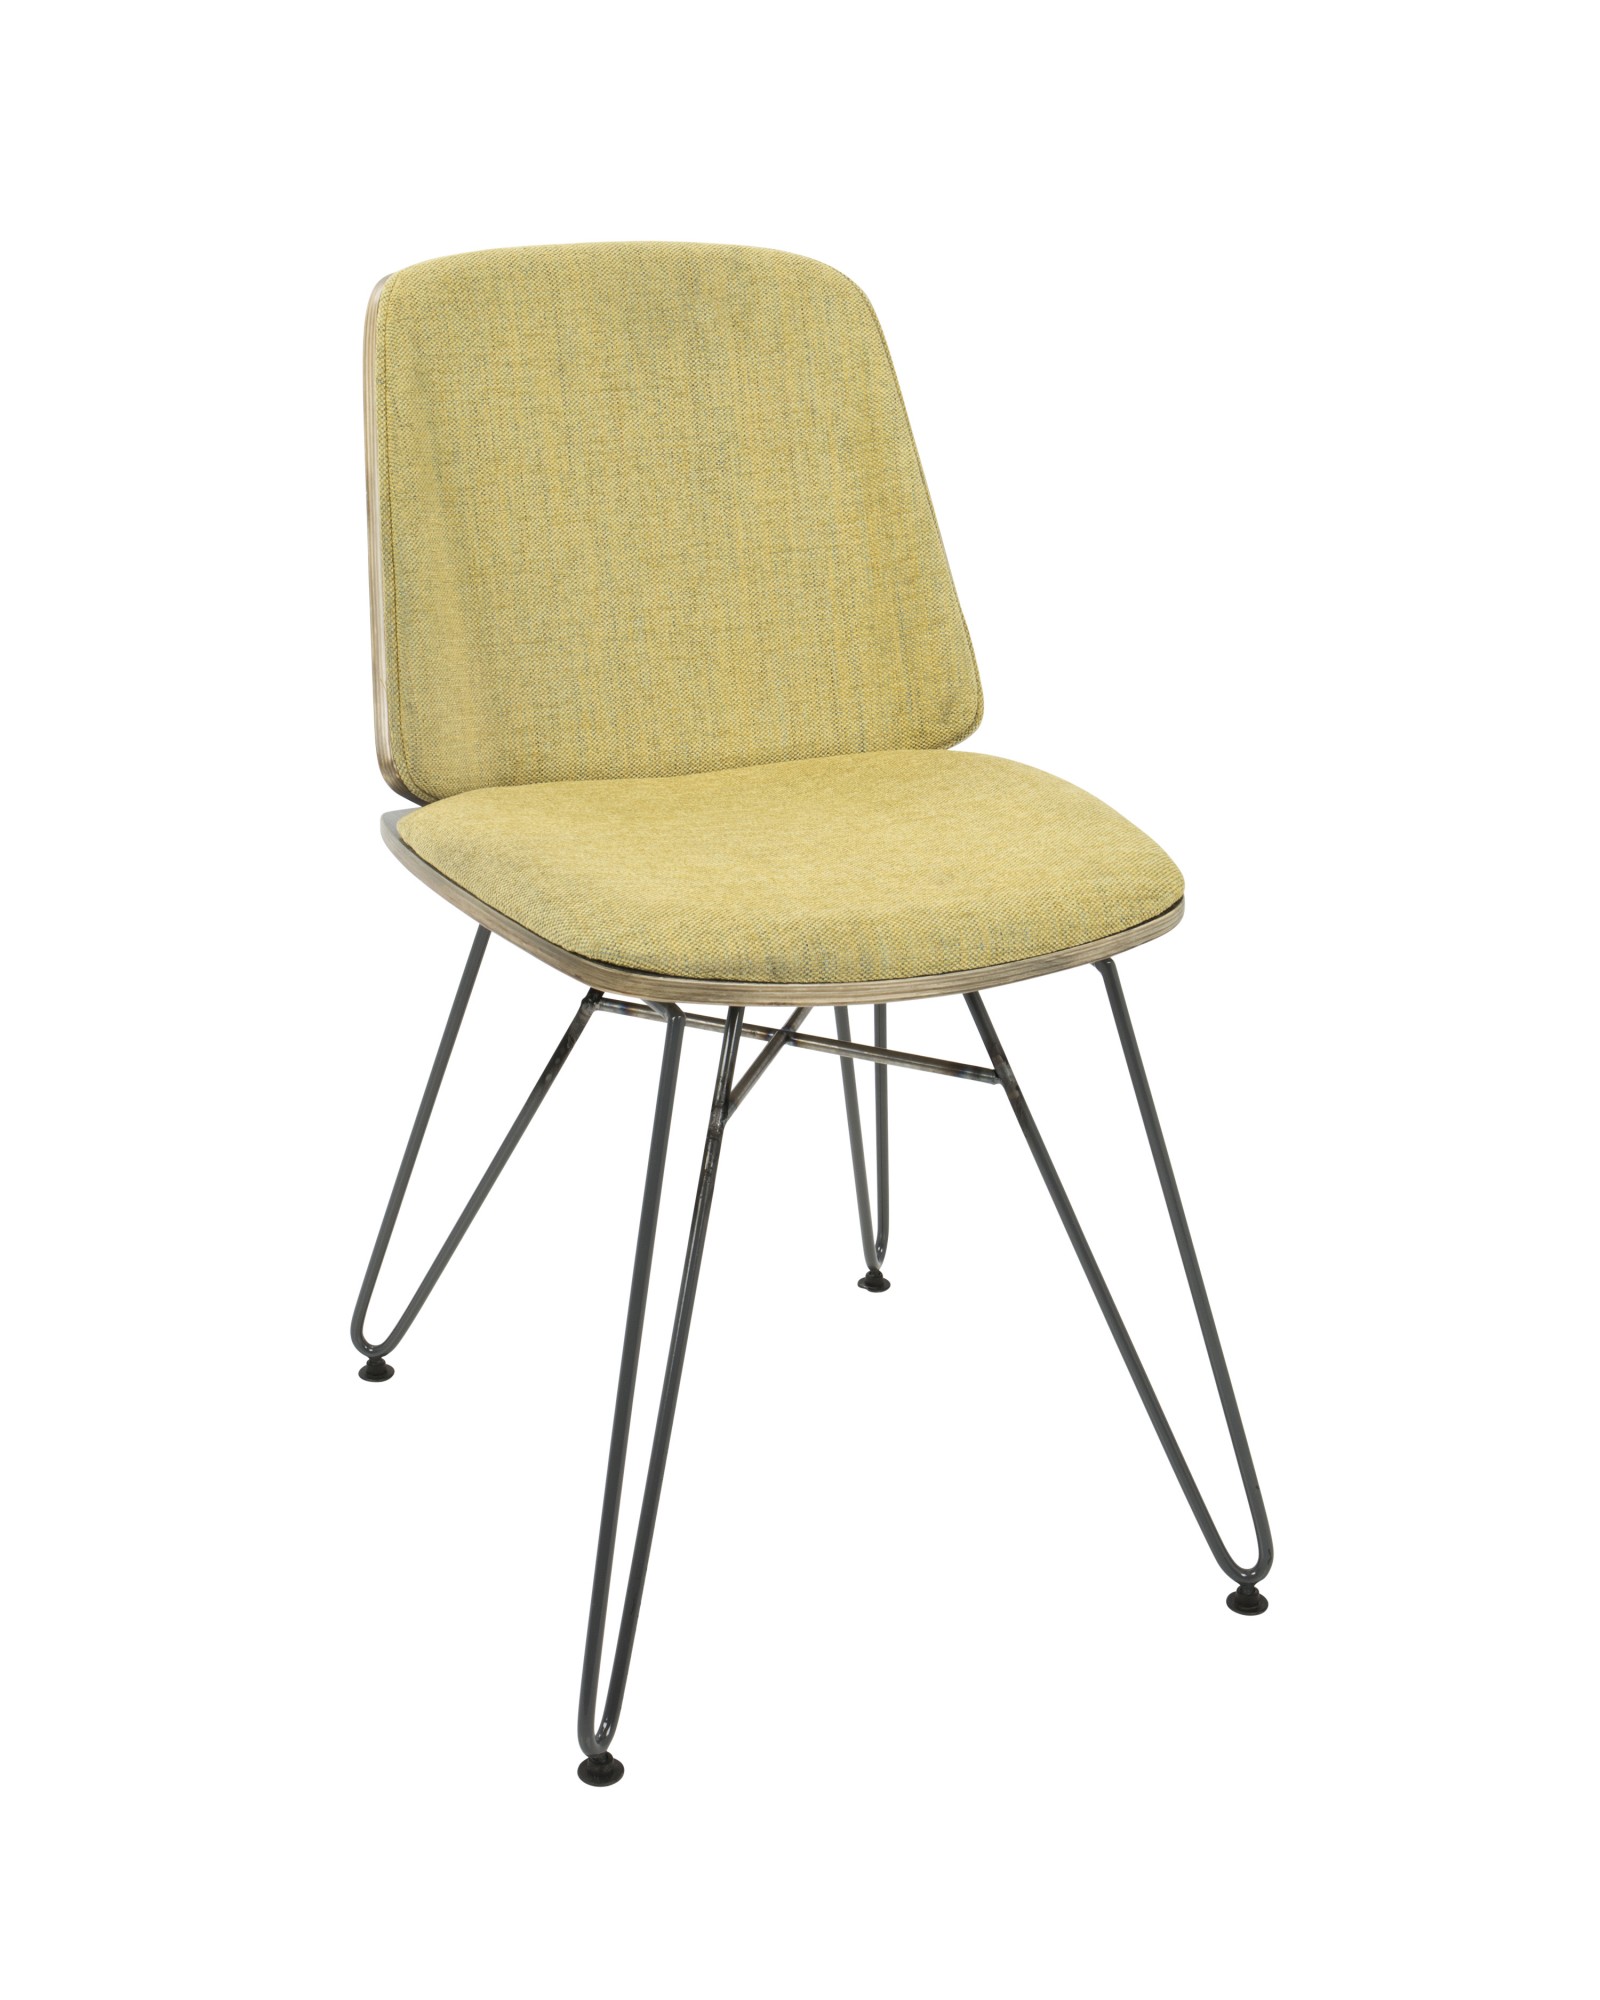 Avery Mid-Century Modern Dining/Accent Chair in Dark Grey Wood and Yellow Fabric - Set of 2